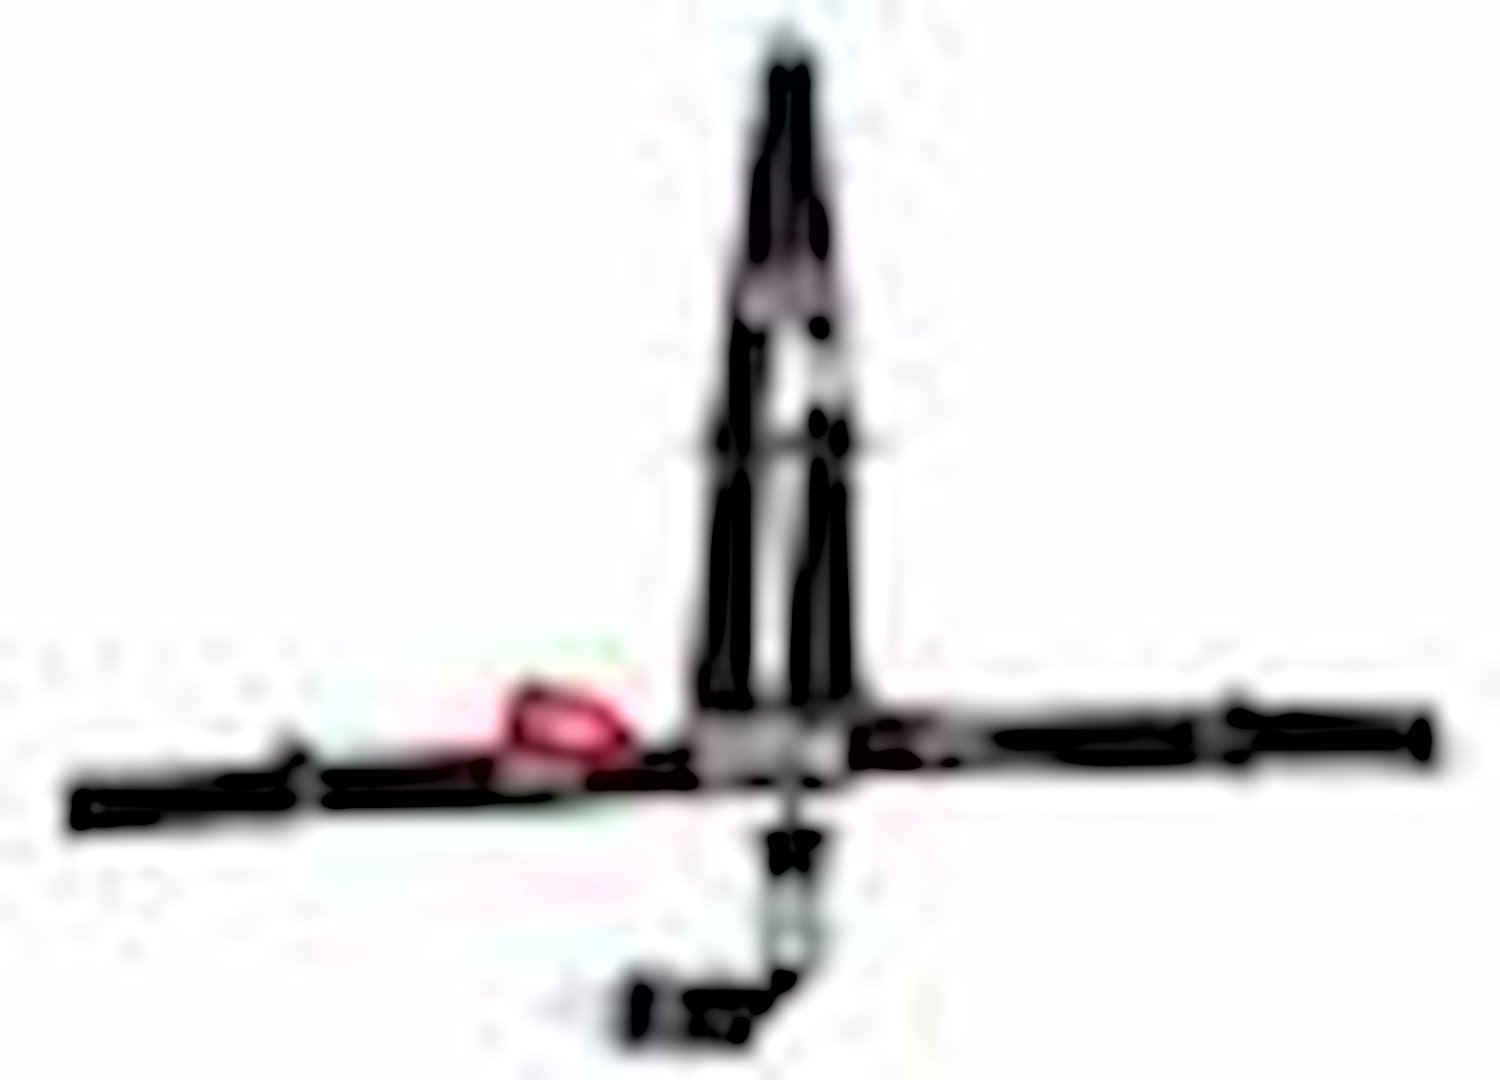 SFI 16.1 L&L HARNESS 2 PULL DOWN Lap Belt 2 Shoulder Harness Individual FLOOR Mount 2 DOUBLE Sub ALL WRAP/BOLT ENDS HOT PINK